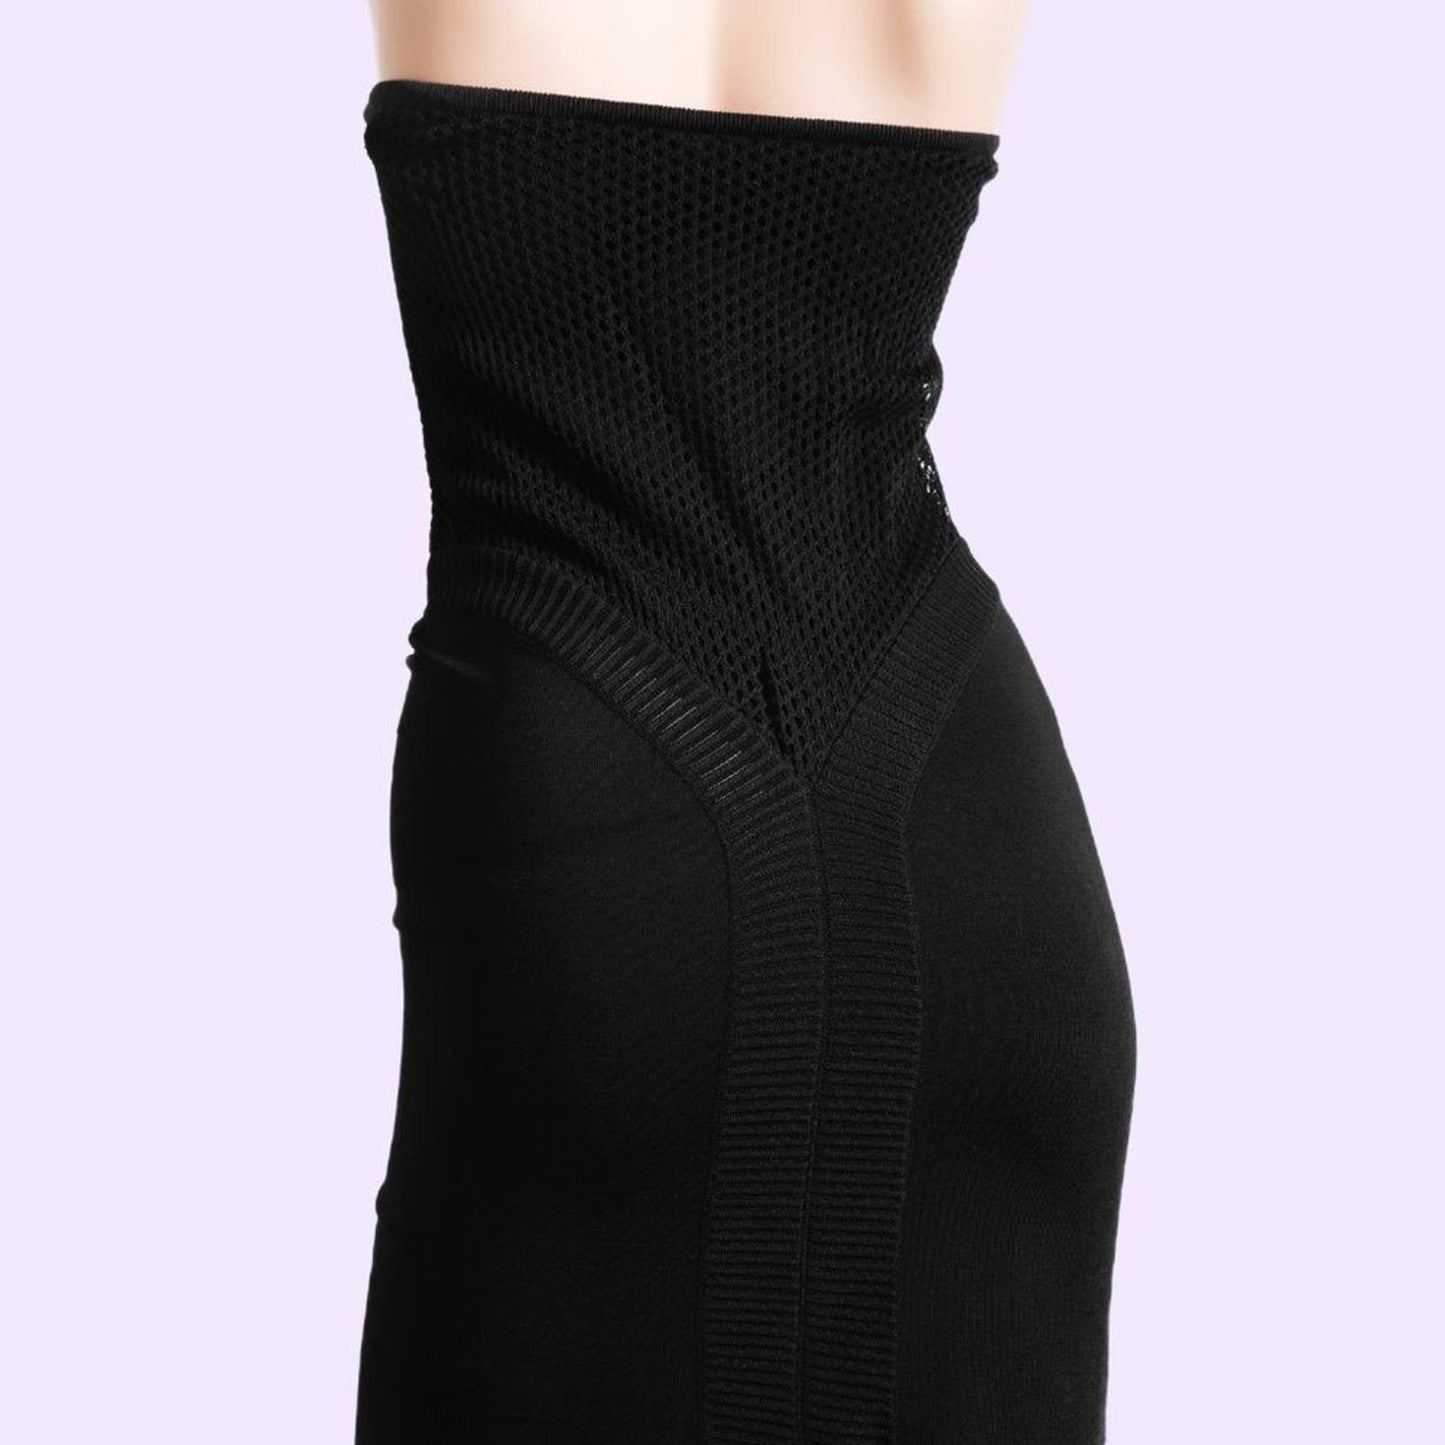 GIVENCHY COUTURE BY ALEXANDER MCQUEEN Vintage 90s Black Knit Strapless Dress